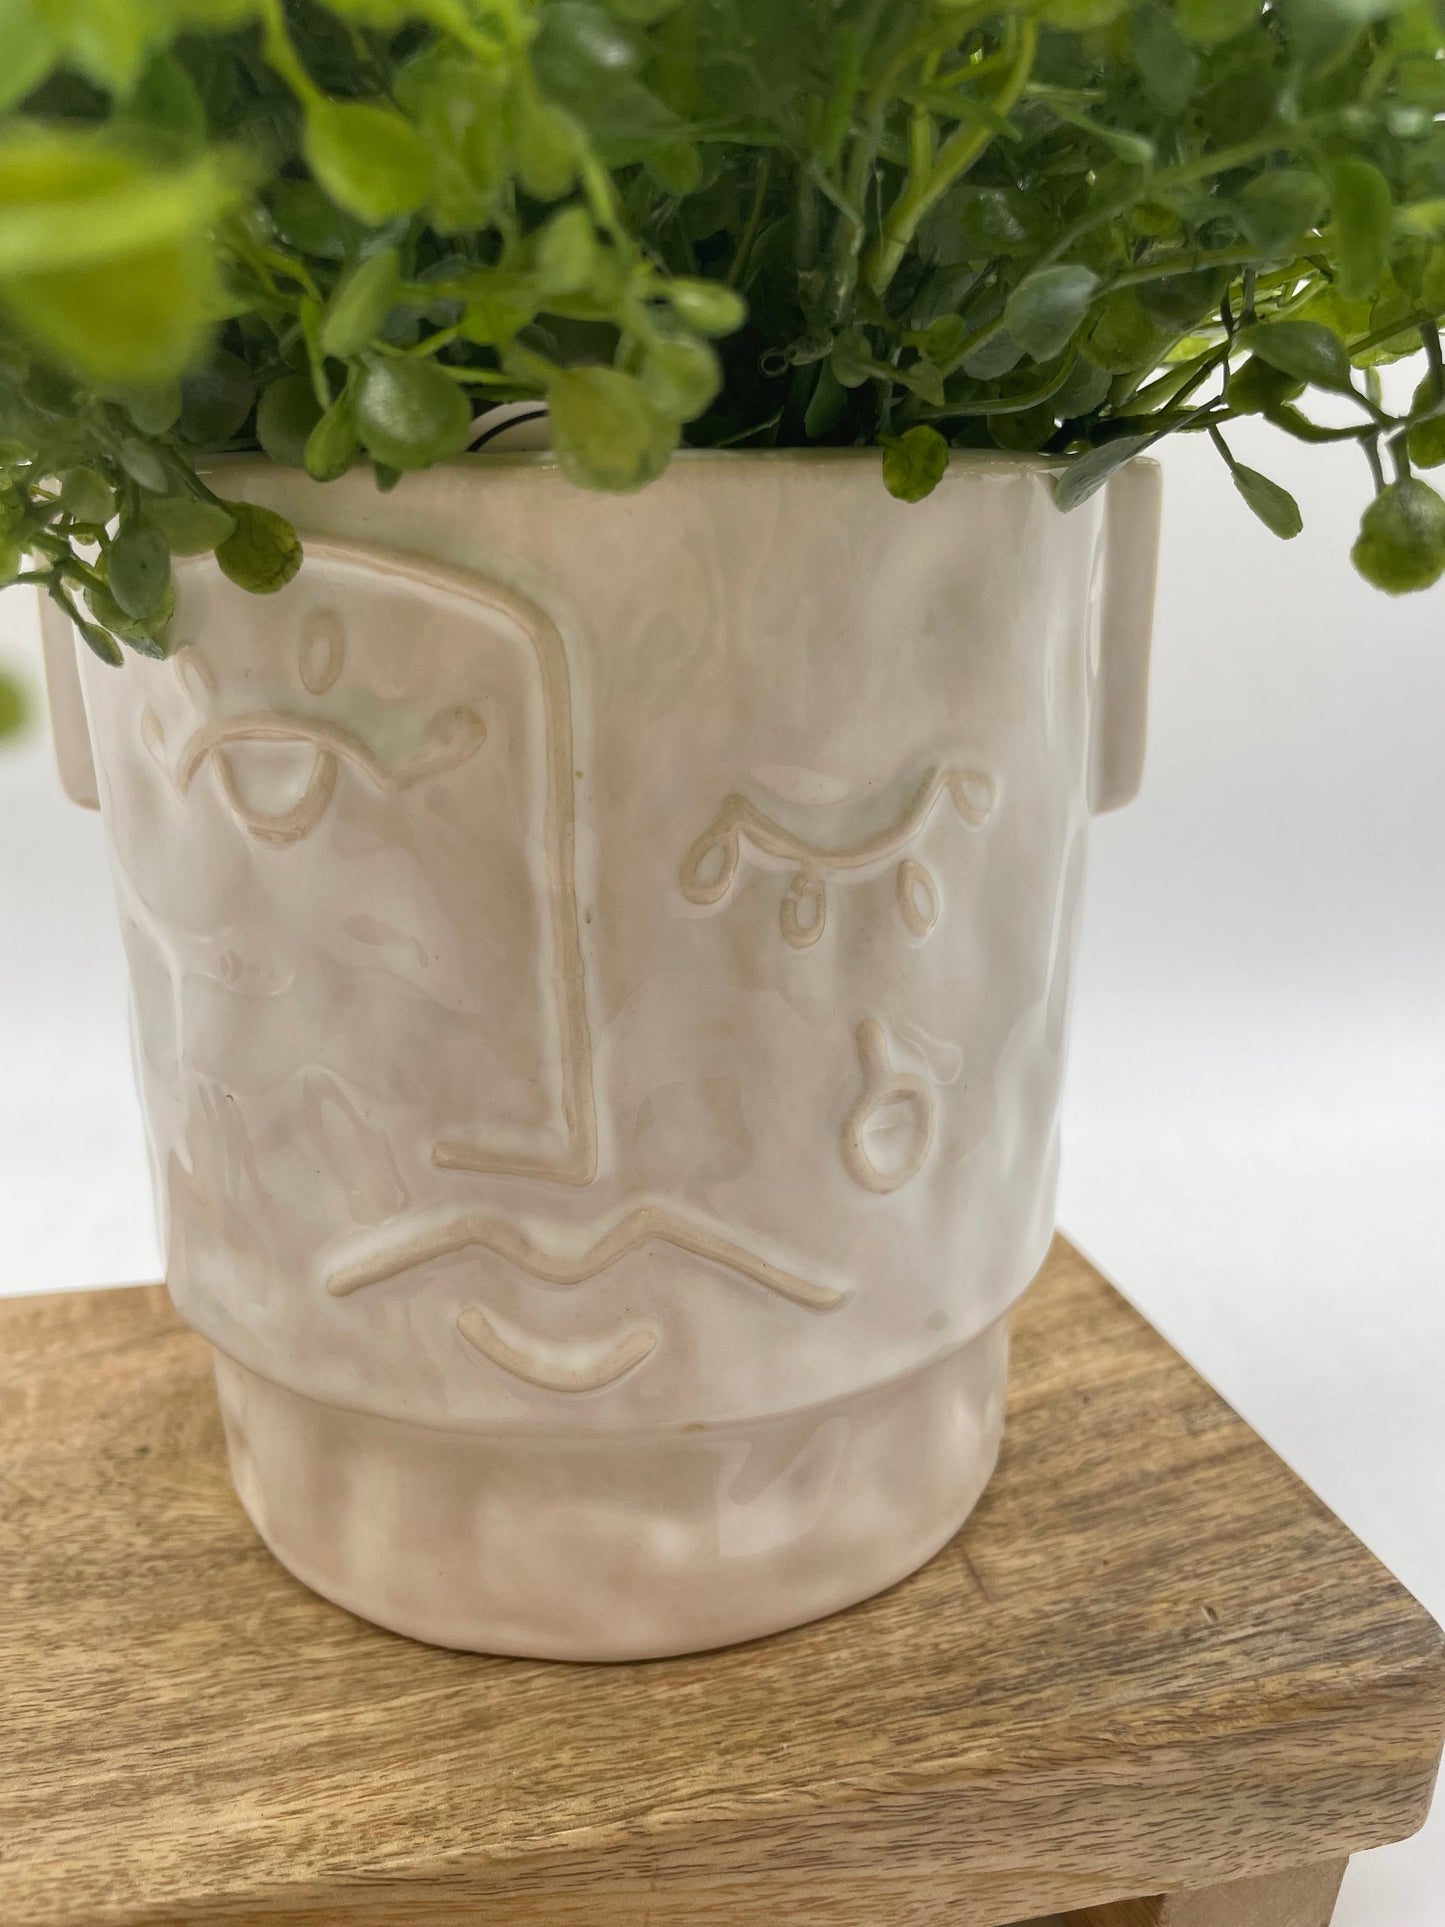 Fake Plants in Man Face Ceramic Pot, Potted Artificial Greenery for Console Table